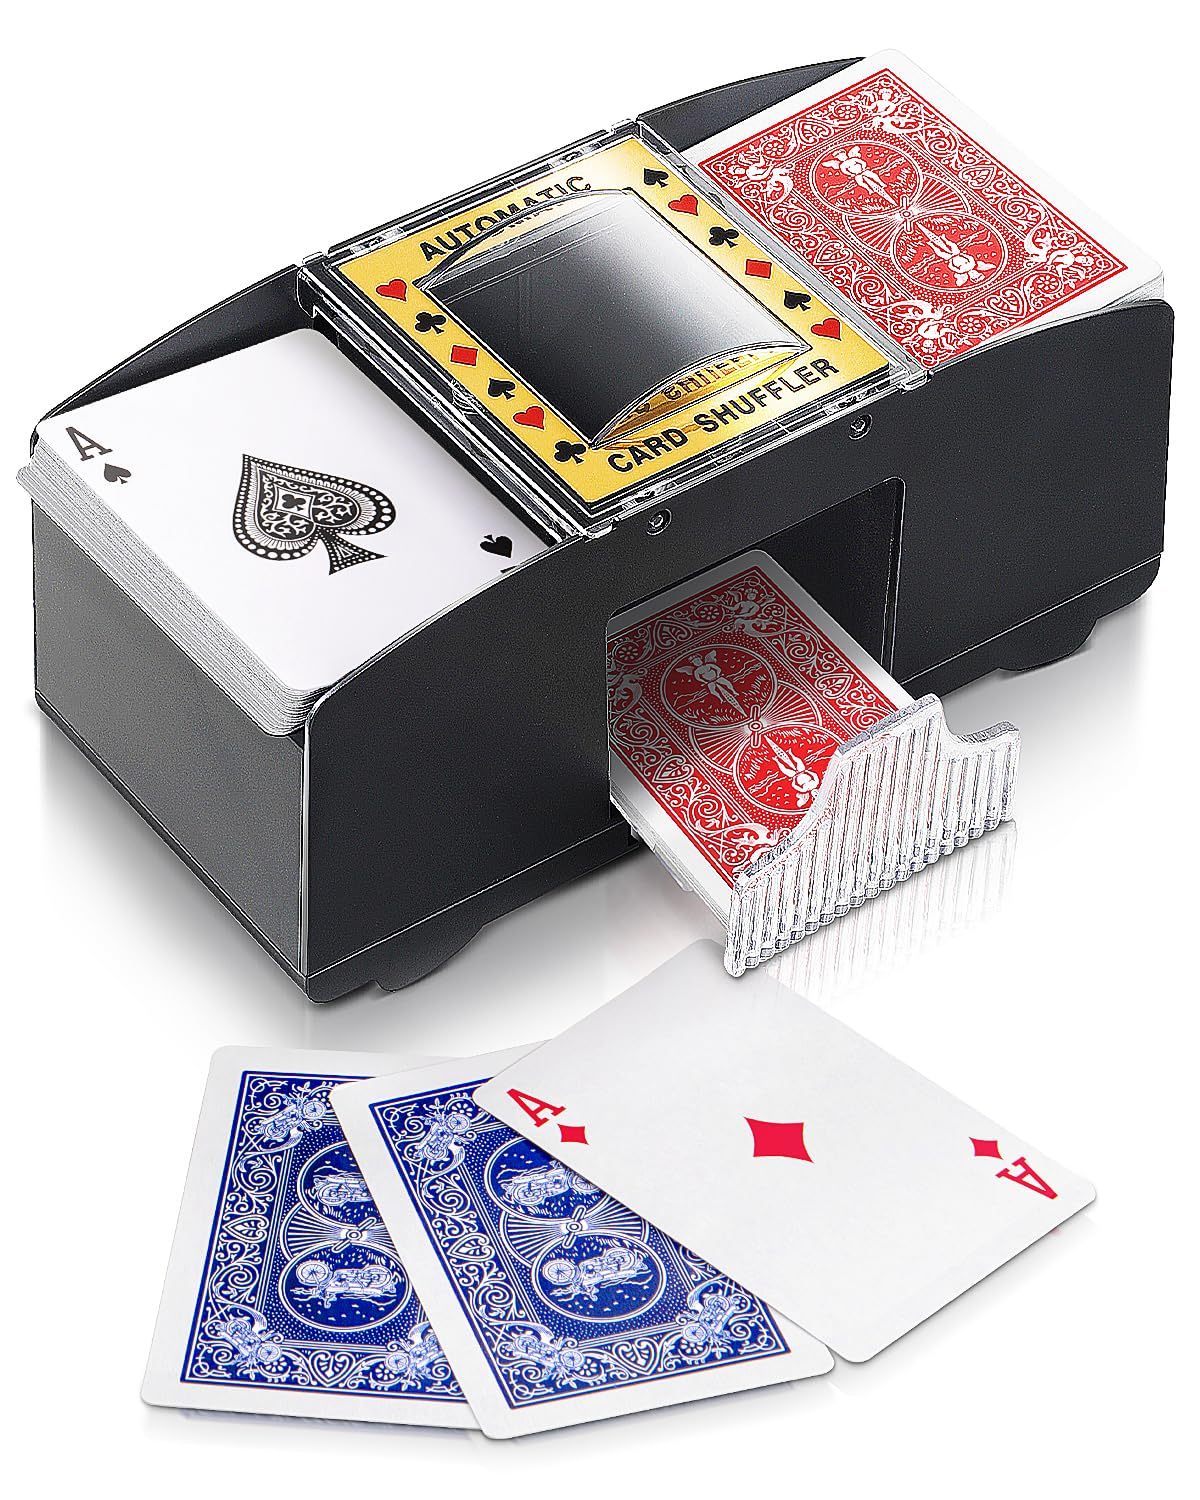 ✨50% OFF TODAY✨Automatic Poker Card Shuffling Machine "Free Your Hands